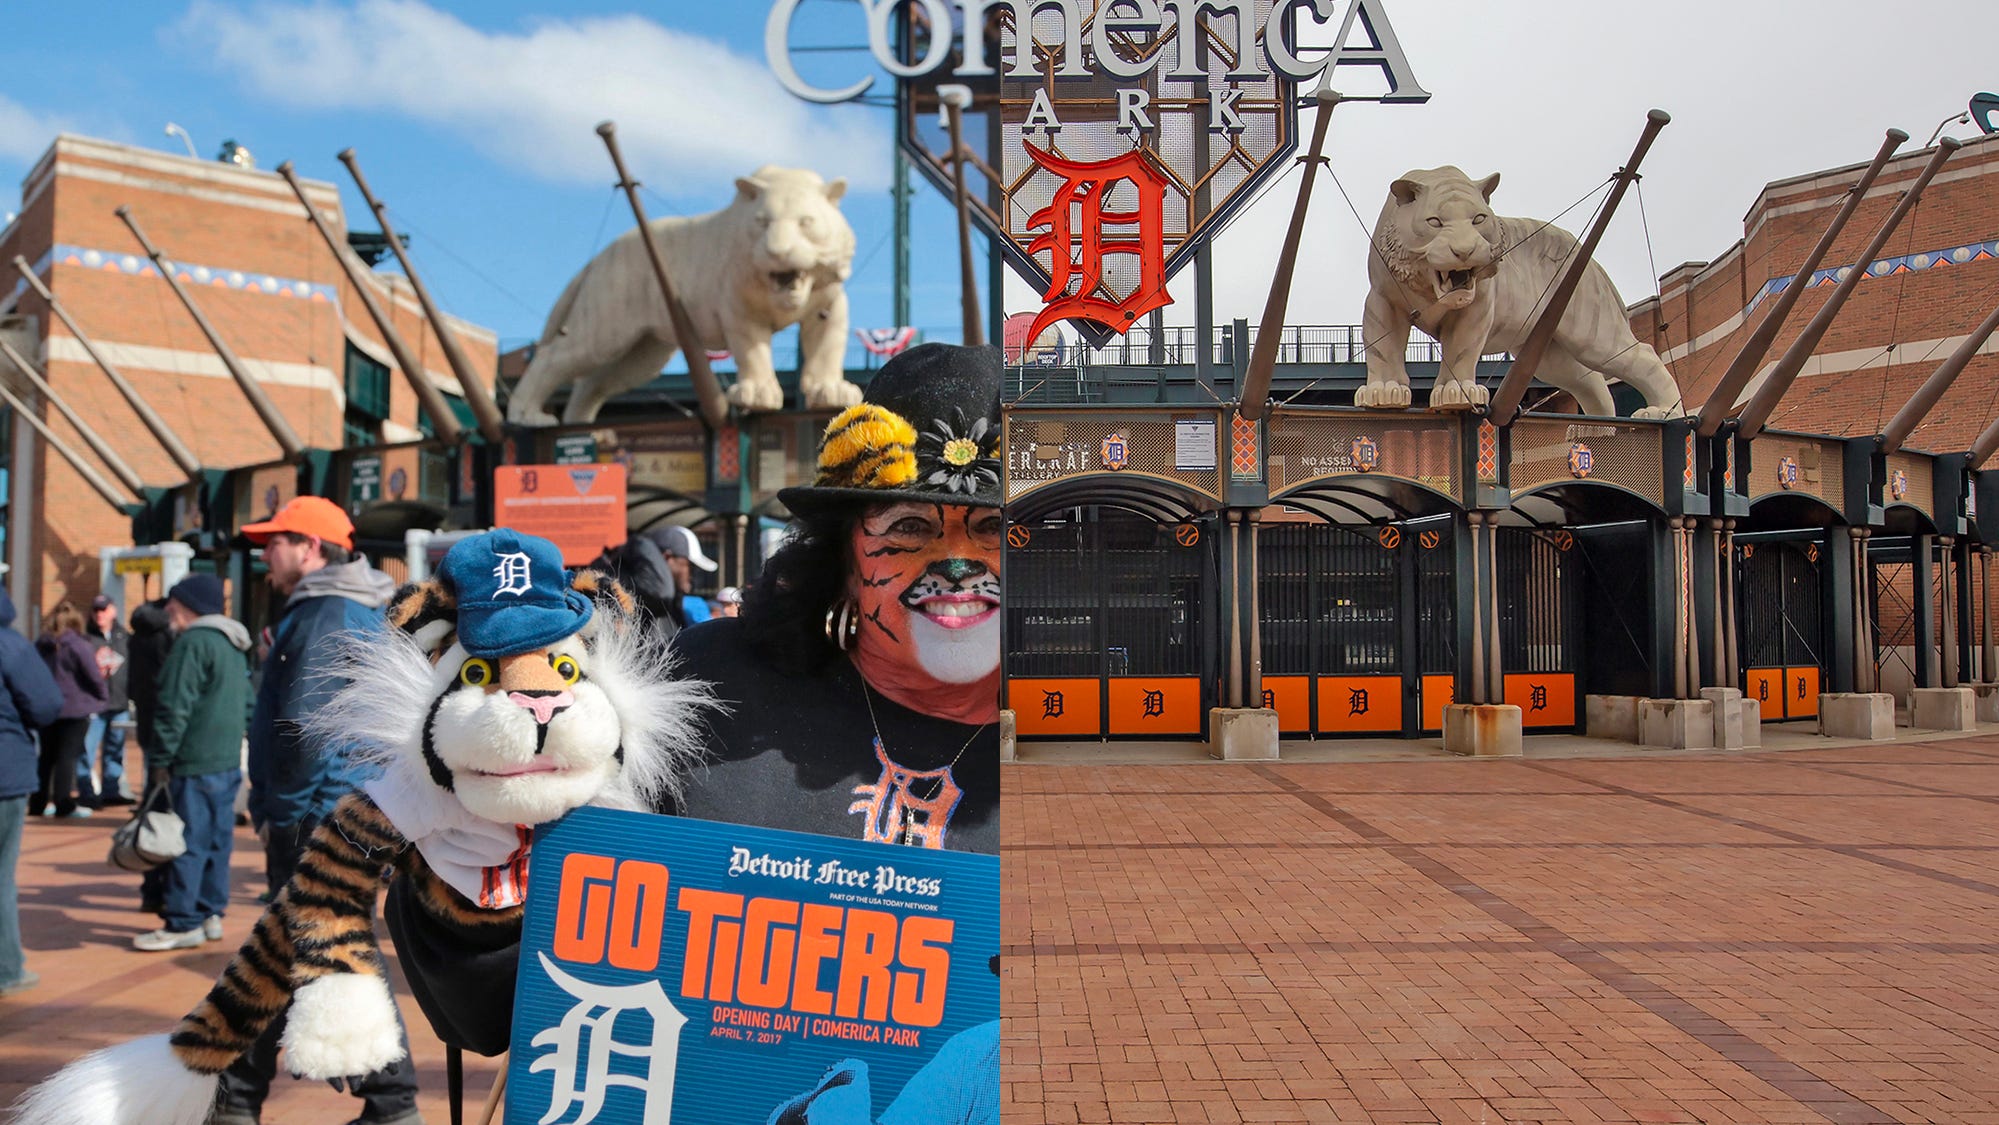 FUN TIMES AT A DETROIT TIGERS GAME AT COMERICA PARK - Fab Everyday